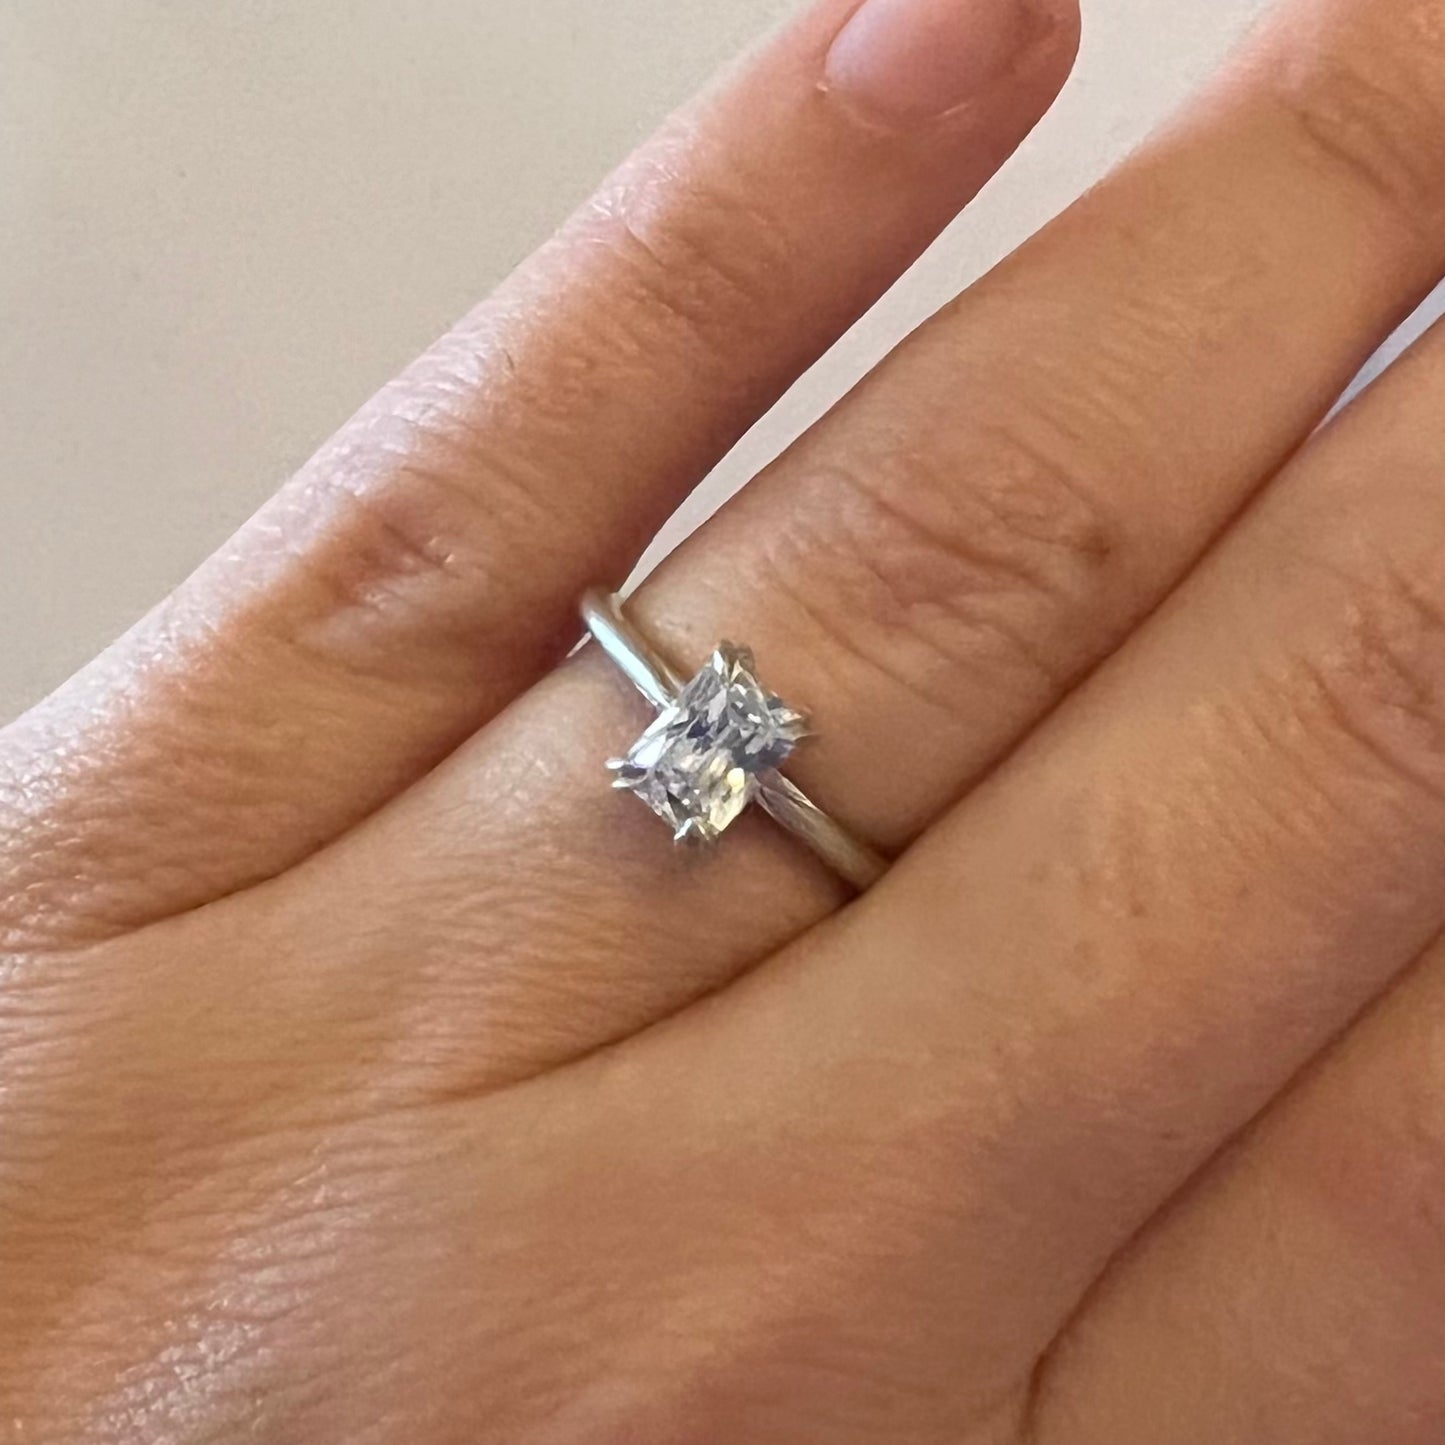 e. scott nuptials… The Dainty Double engagement ring